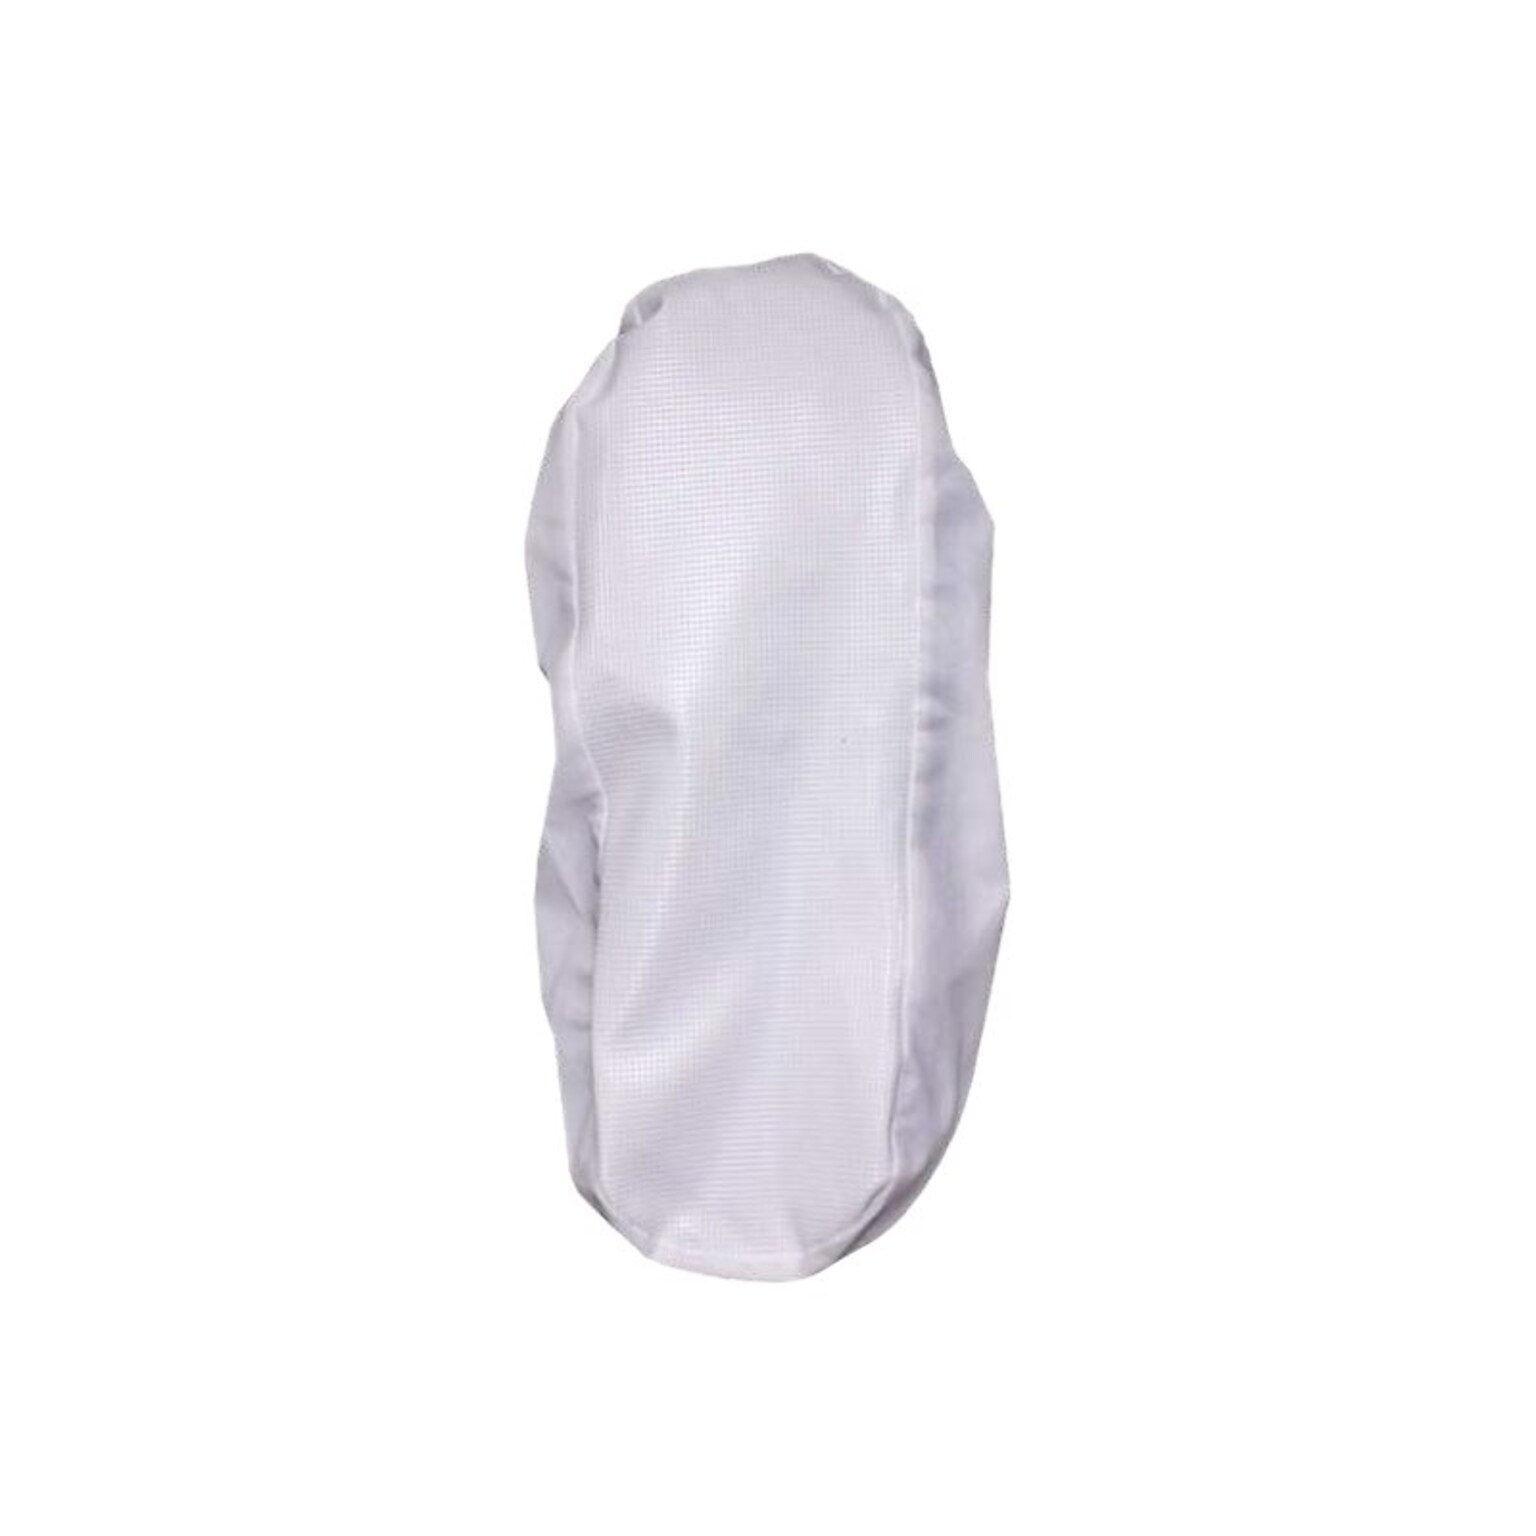 Unimed Waterproof Shoe Cover, Size M, White, 400/Carton (OPSC897MDW)